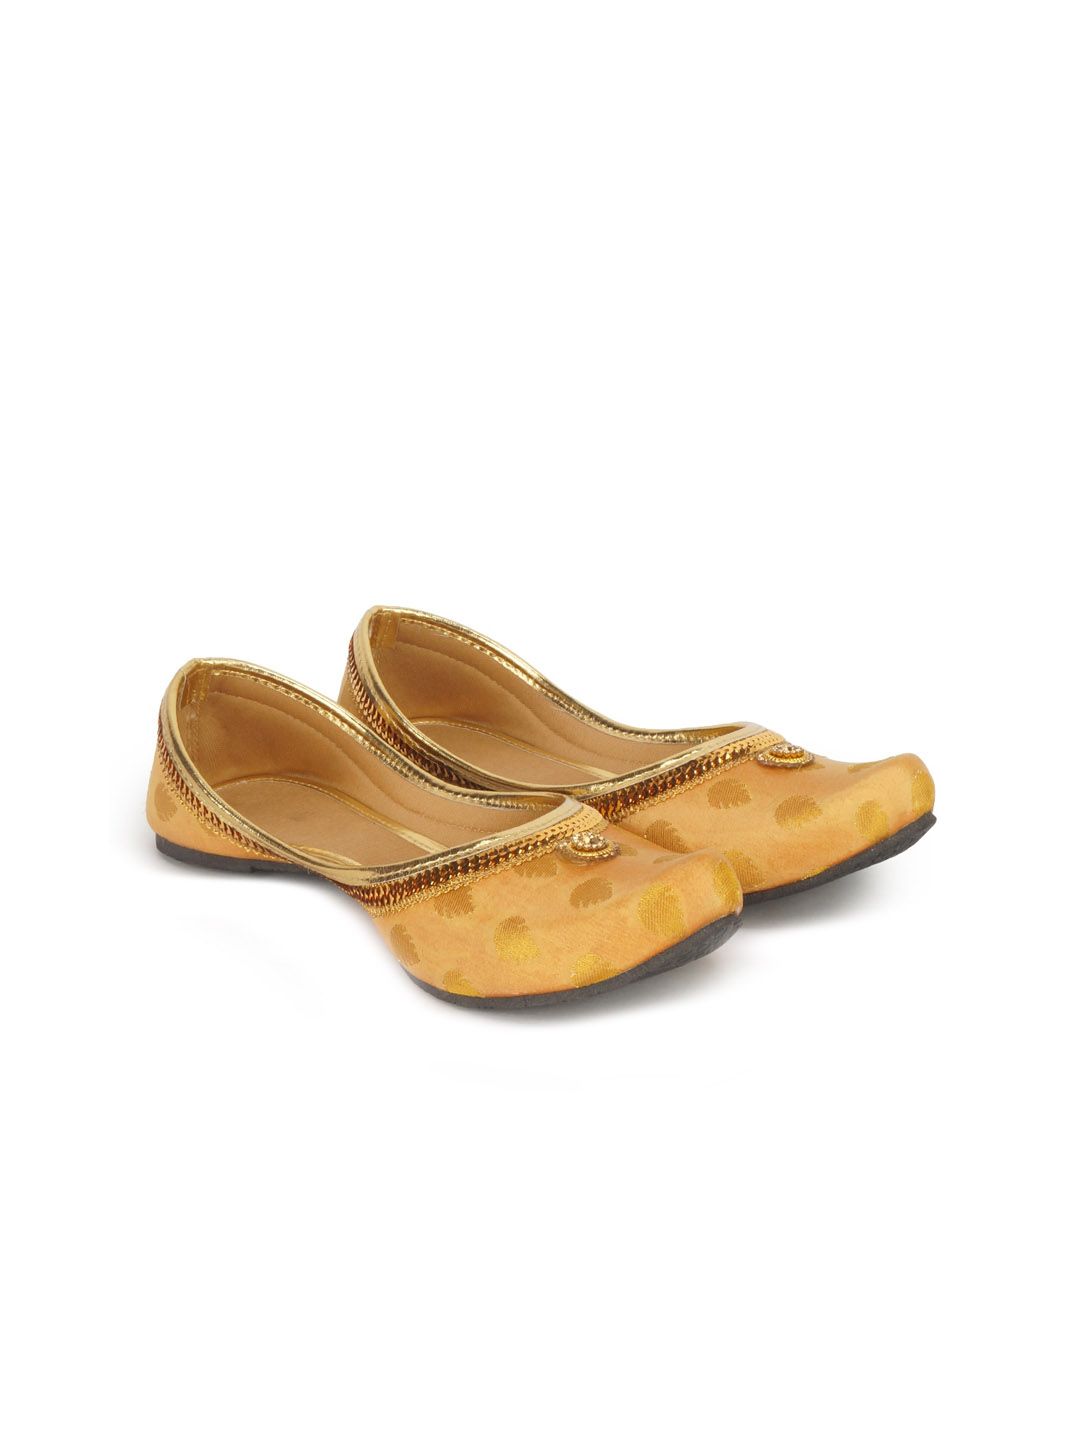 The Desi Dulhan Women Gold-Toned Embellished Ethnic Ballerinas Price in India